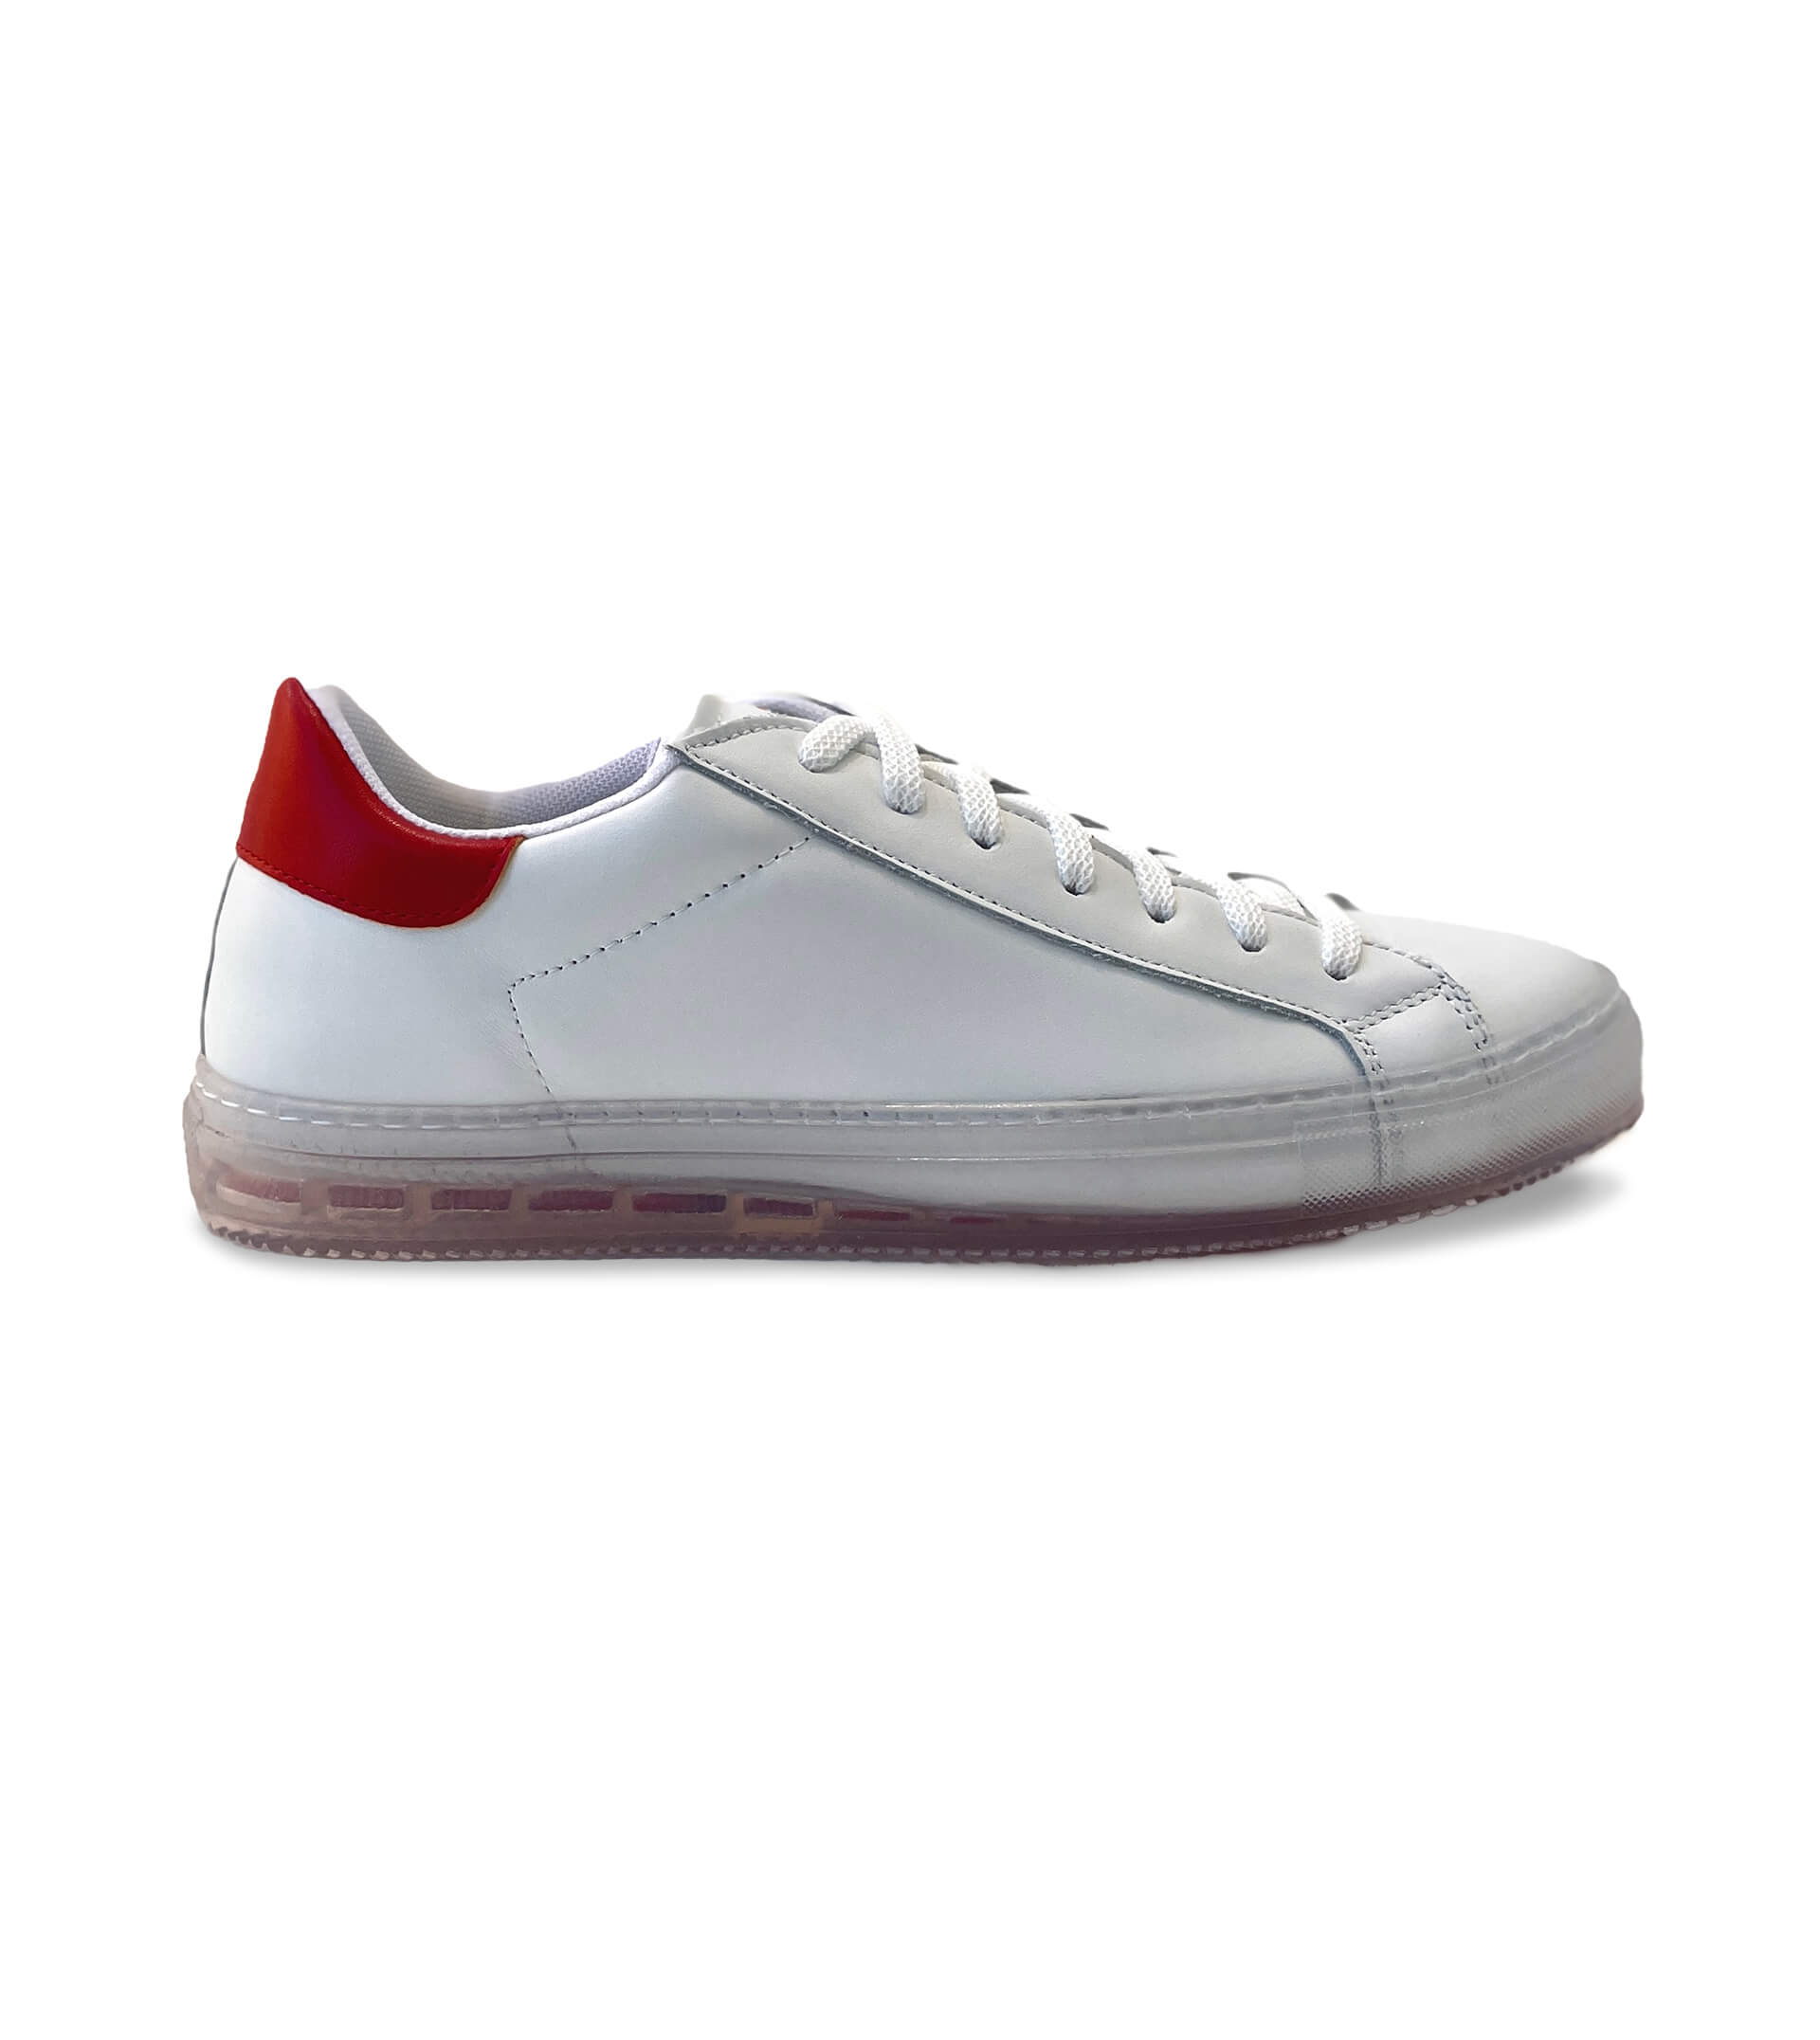 KITON Red Edition Leather Sneaker